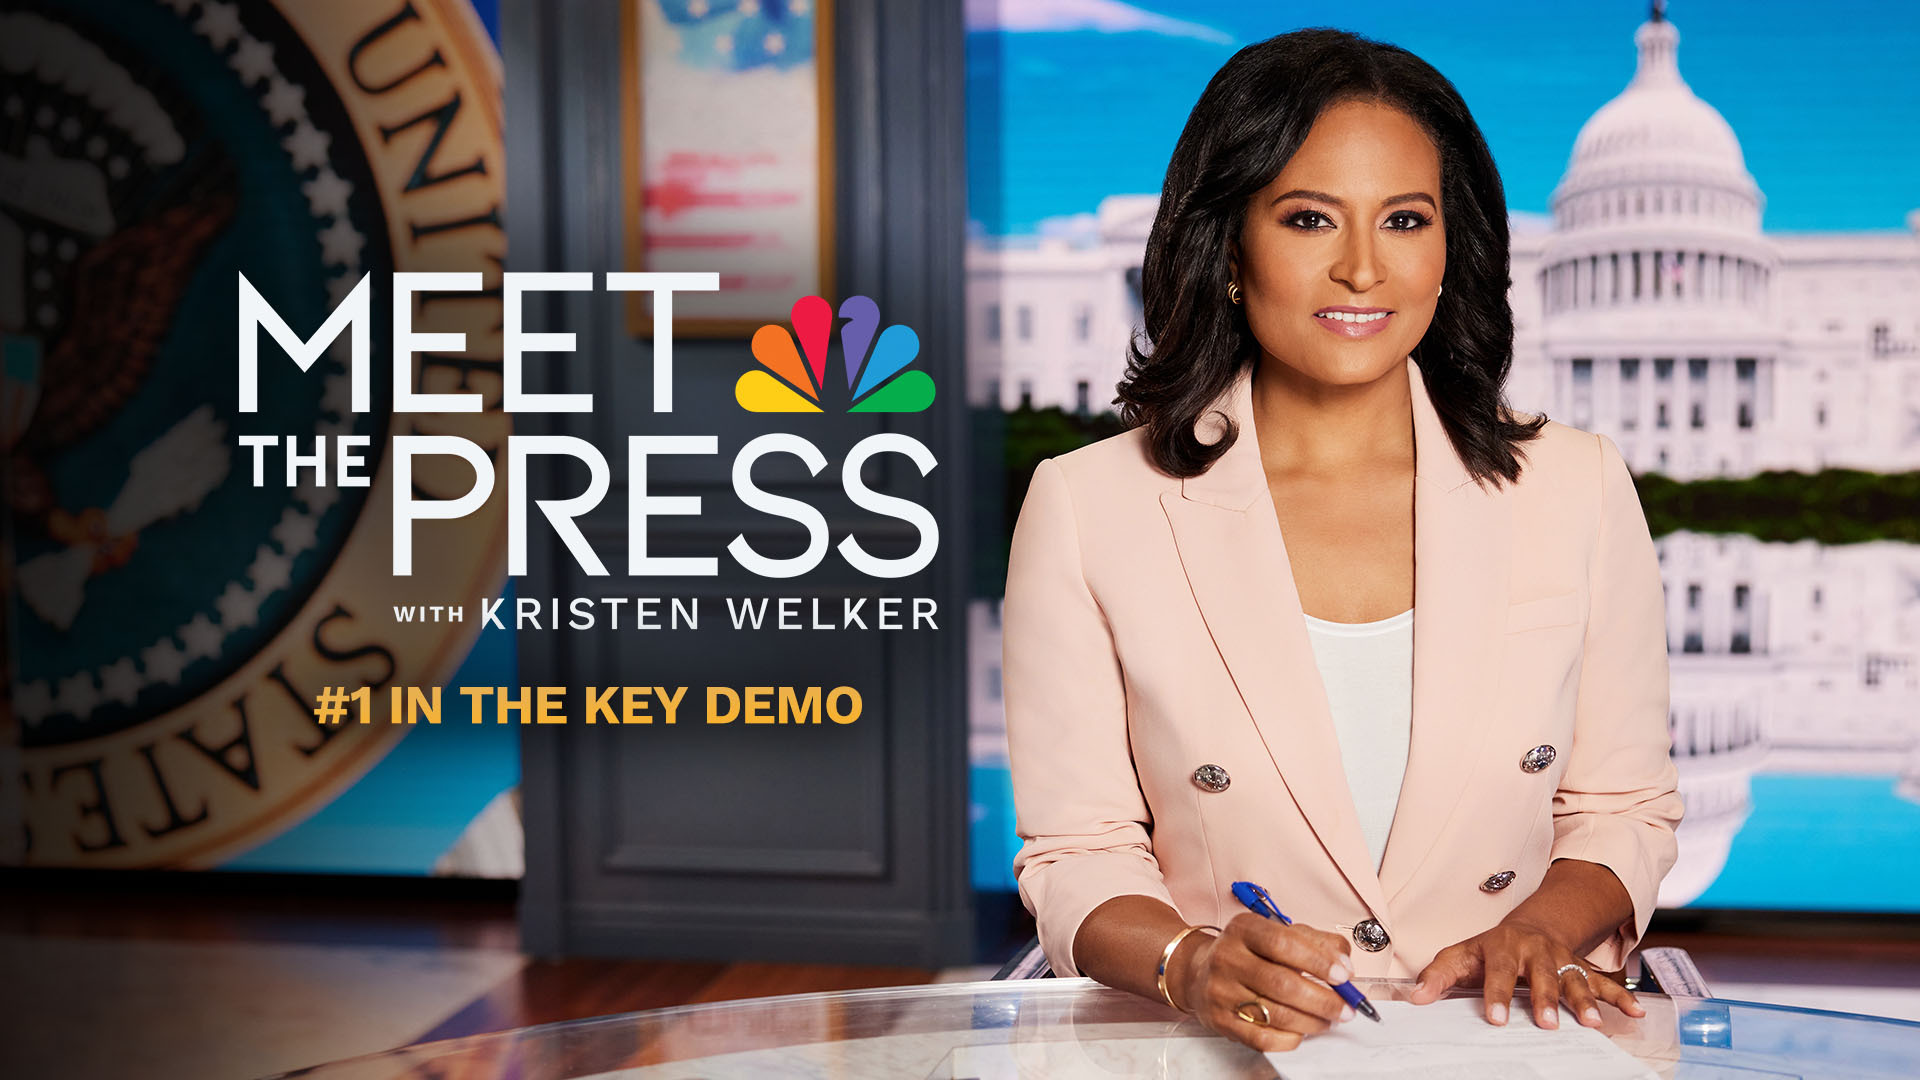 “Meet The Press with Kristen Welker” is #1 in the Key Demo This Past Sunday 